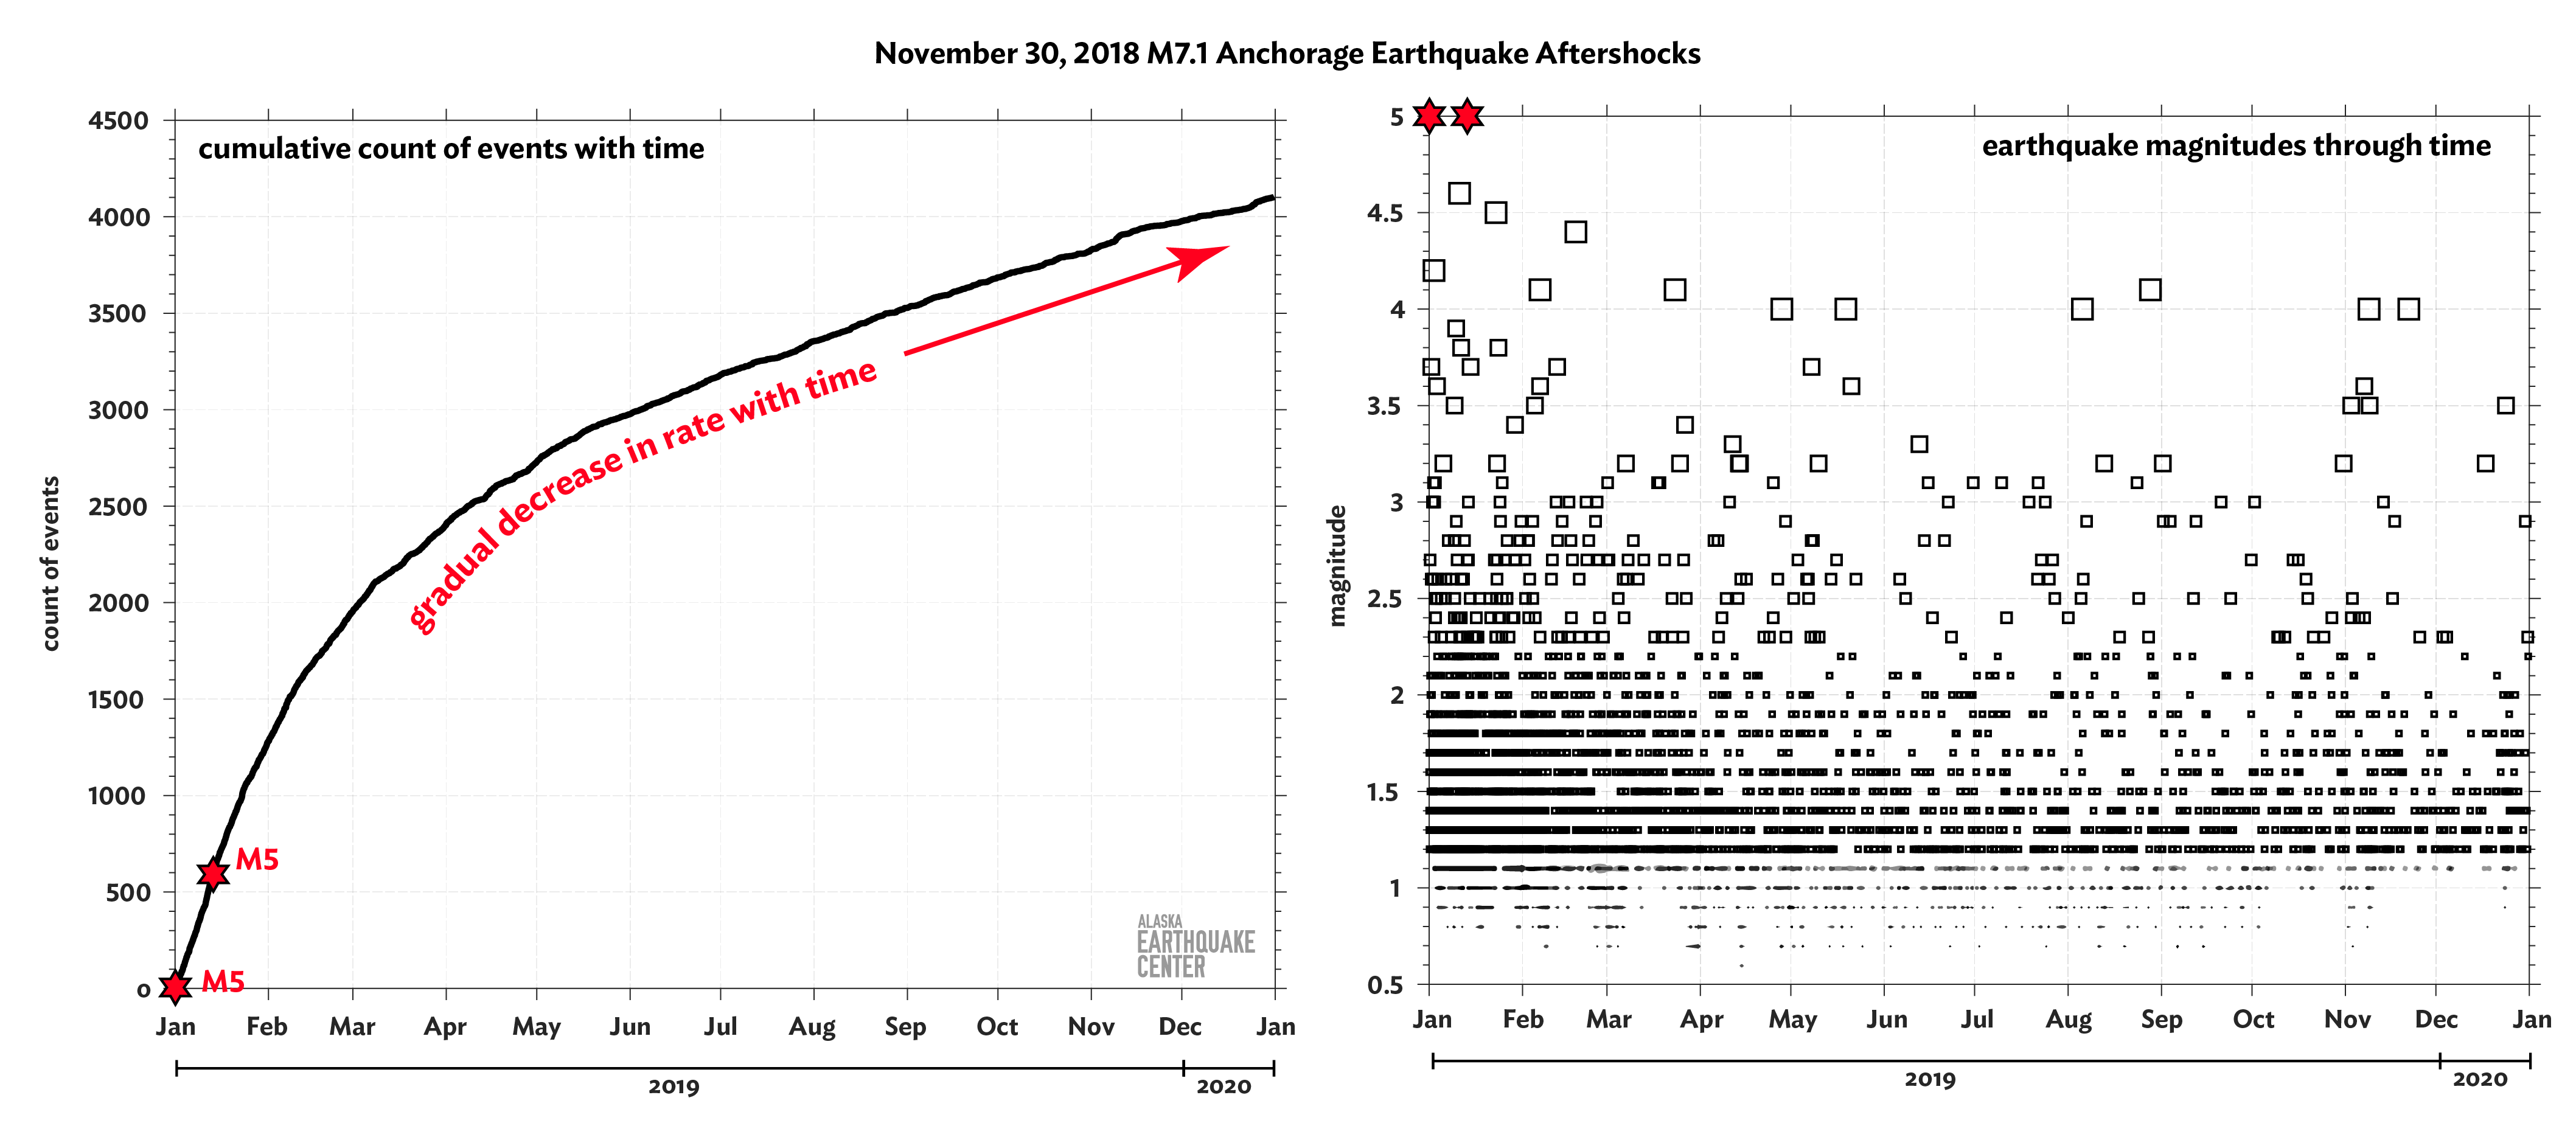 These plots show the cumulative count of aftershocks from the November 30, 2018 M7.1 Anchorage earthquake with time